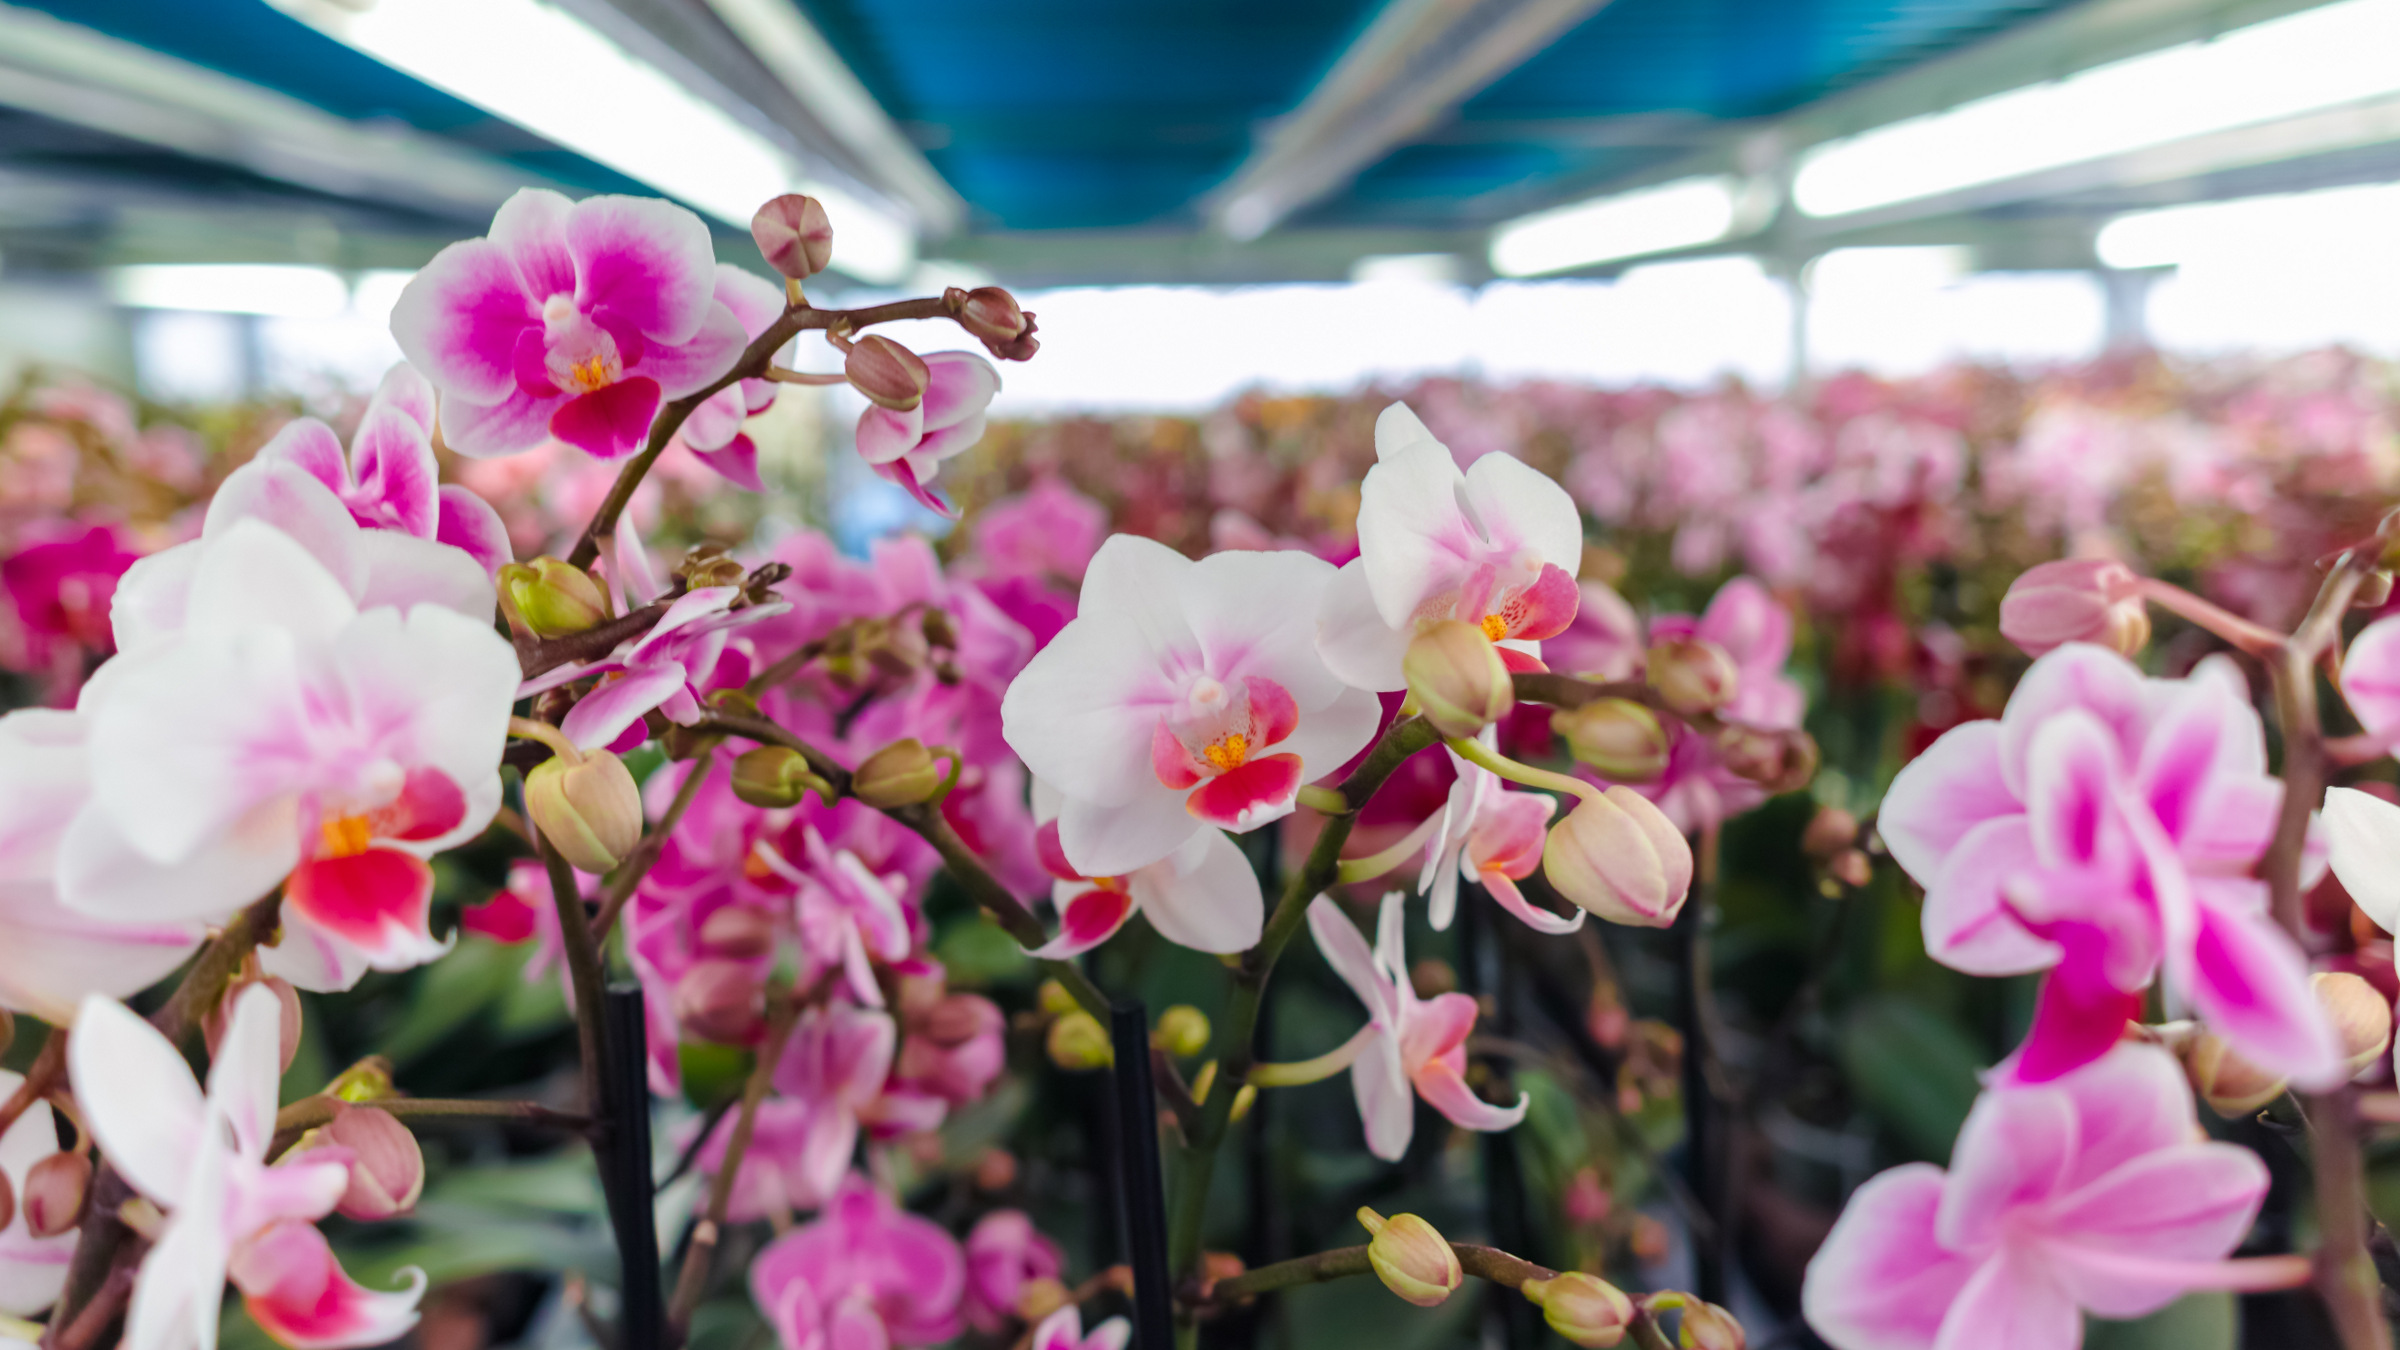 Credit: Getty Images. Orchid greenhouse